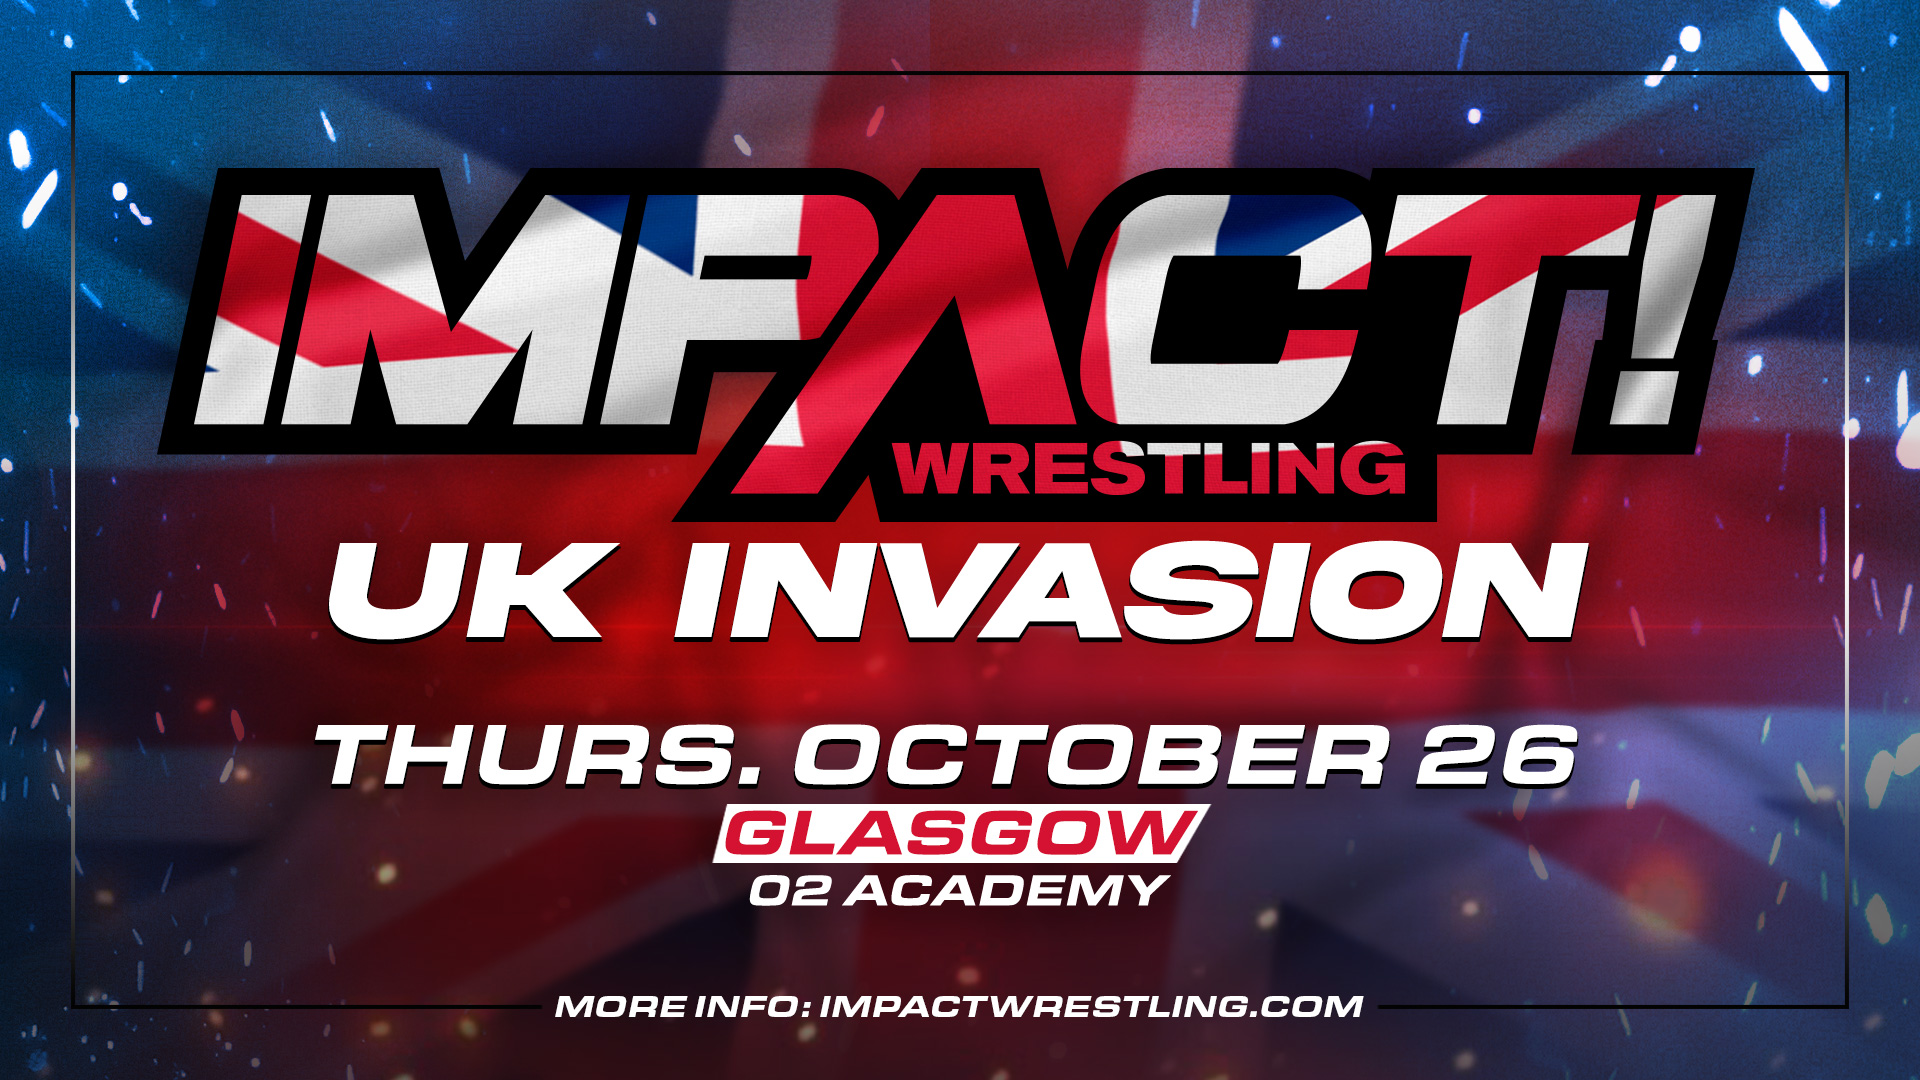 Preview the Lineup for the UK Invasion Tour LIVE October 26th in Glasgow – IMPACT Wrestling